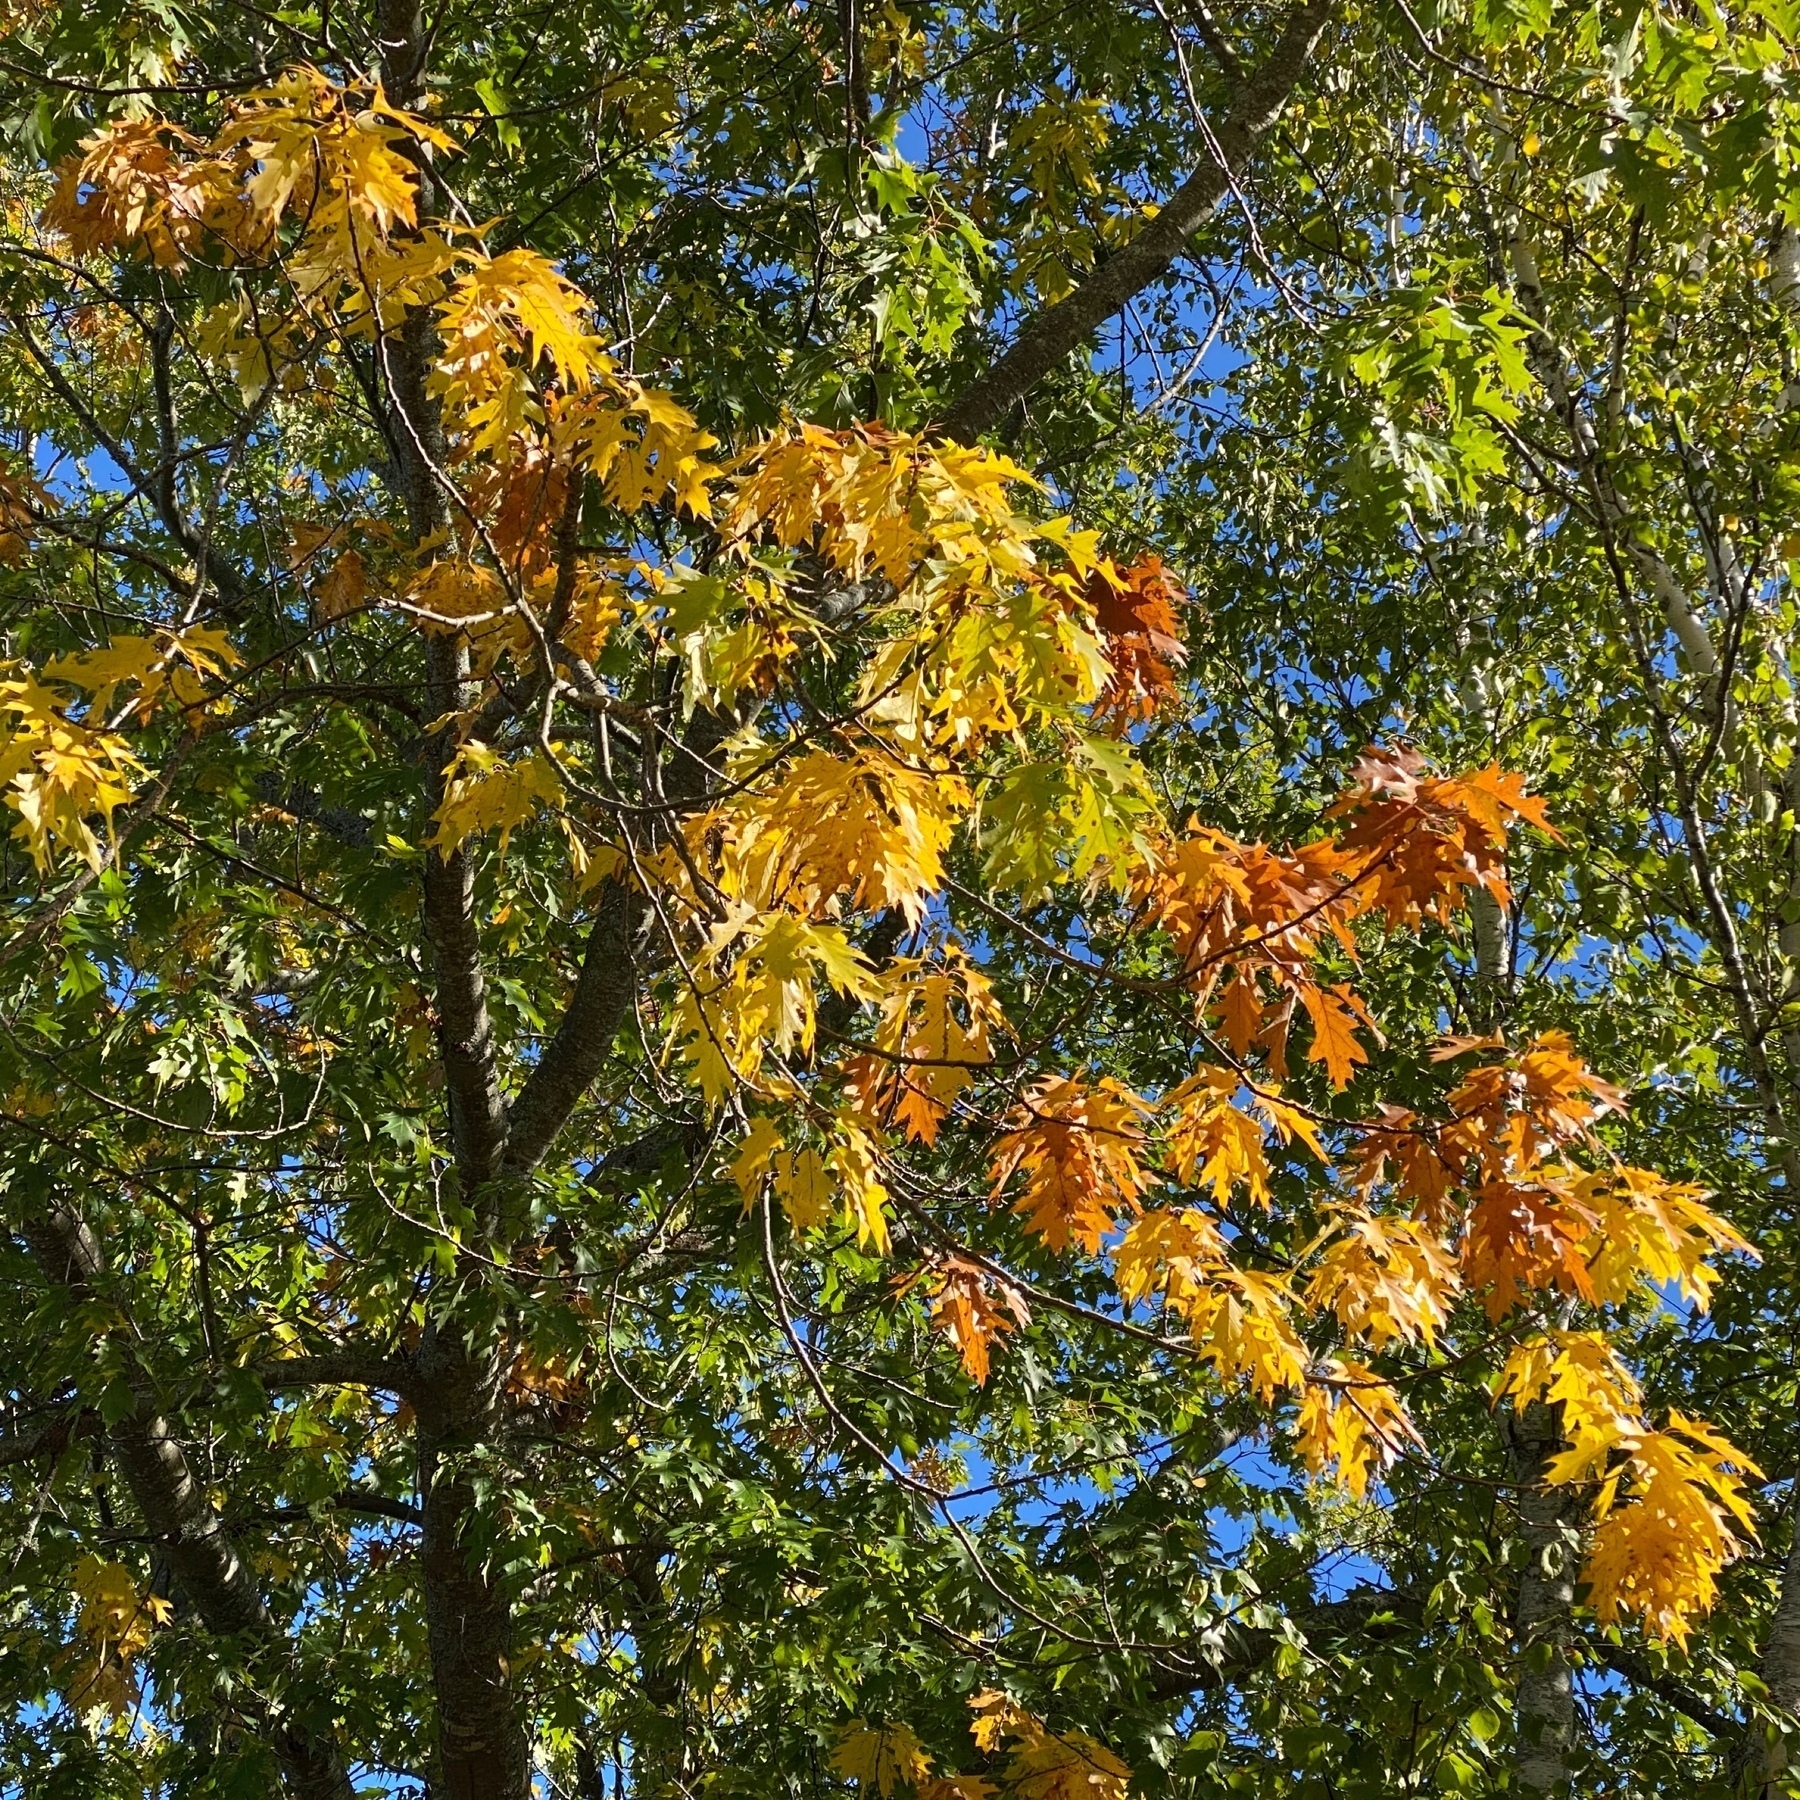 Leaves on oak tree changing colour.